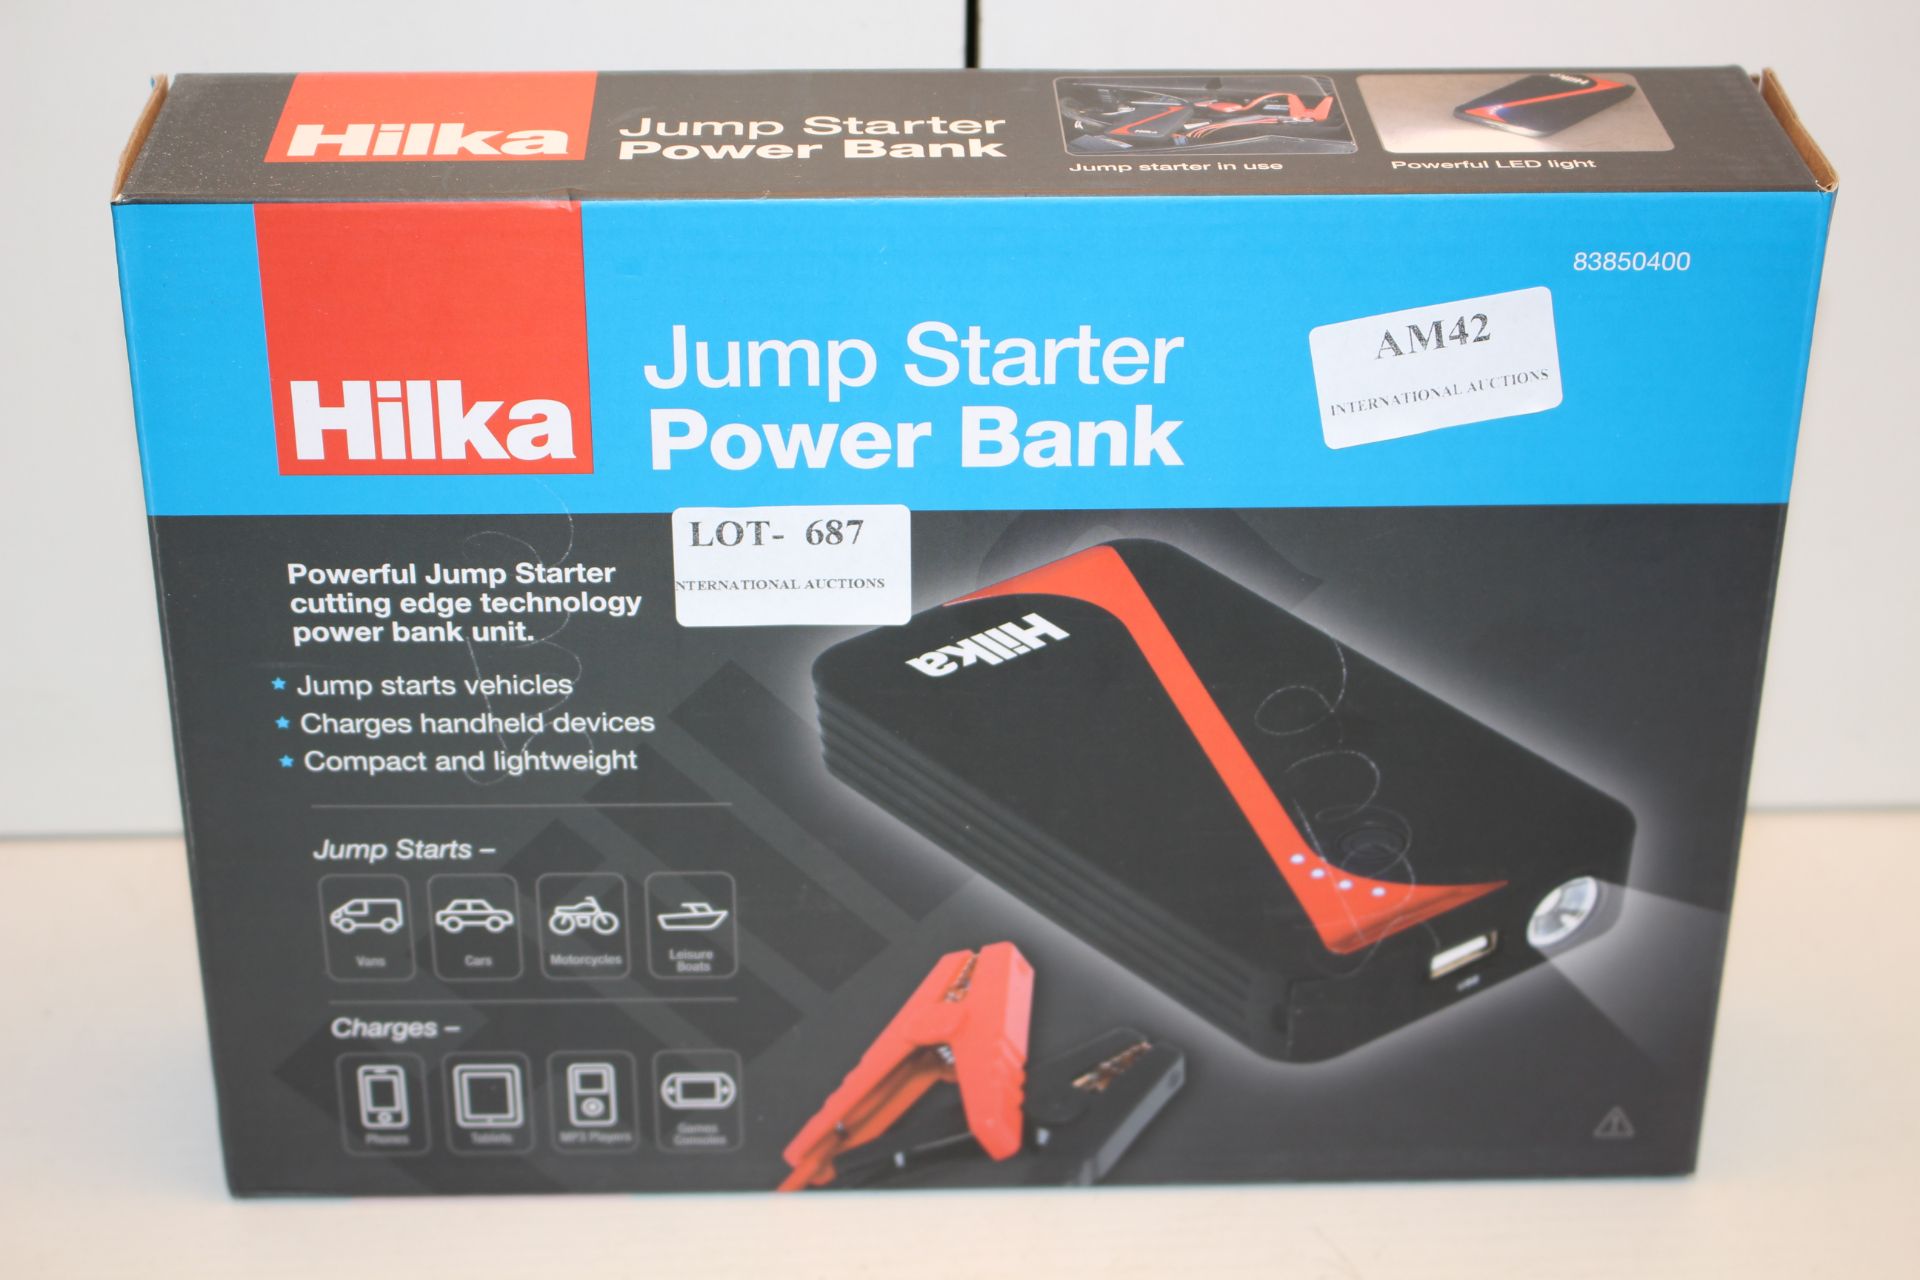 BOXED HILKA JUMP STARTER POWER BANK 83850400RRP £69.99Condition ReportAppraisal Available on